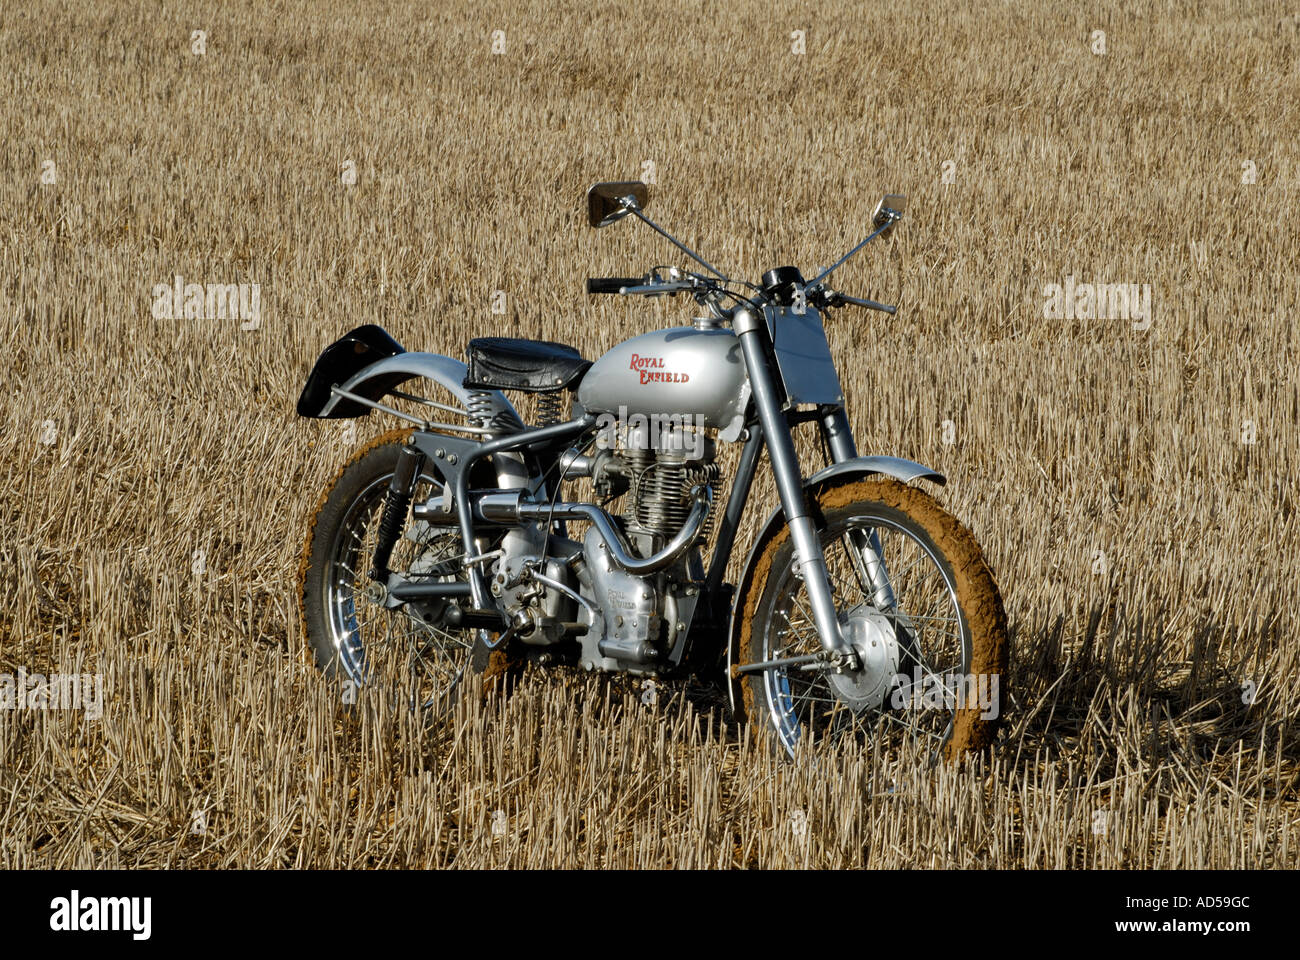 Royal Enfield 350cc Trials motorcycle in a field of straw stubble Stock Photo